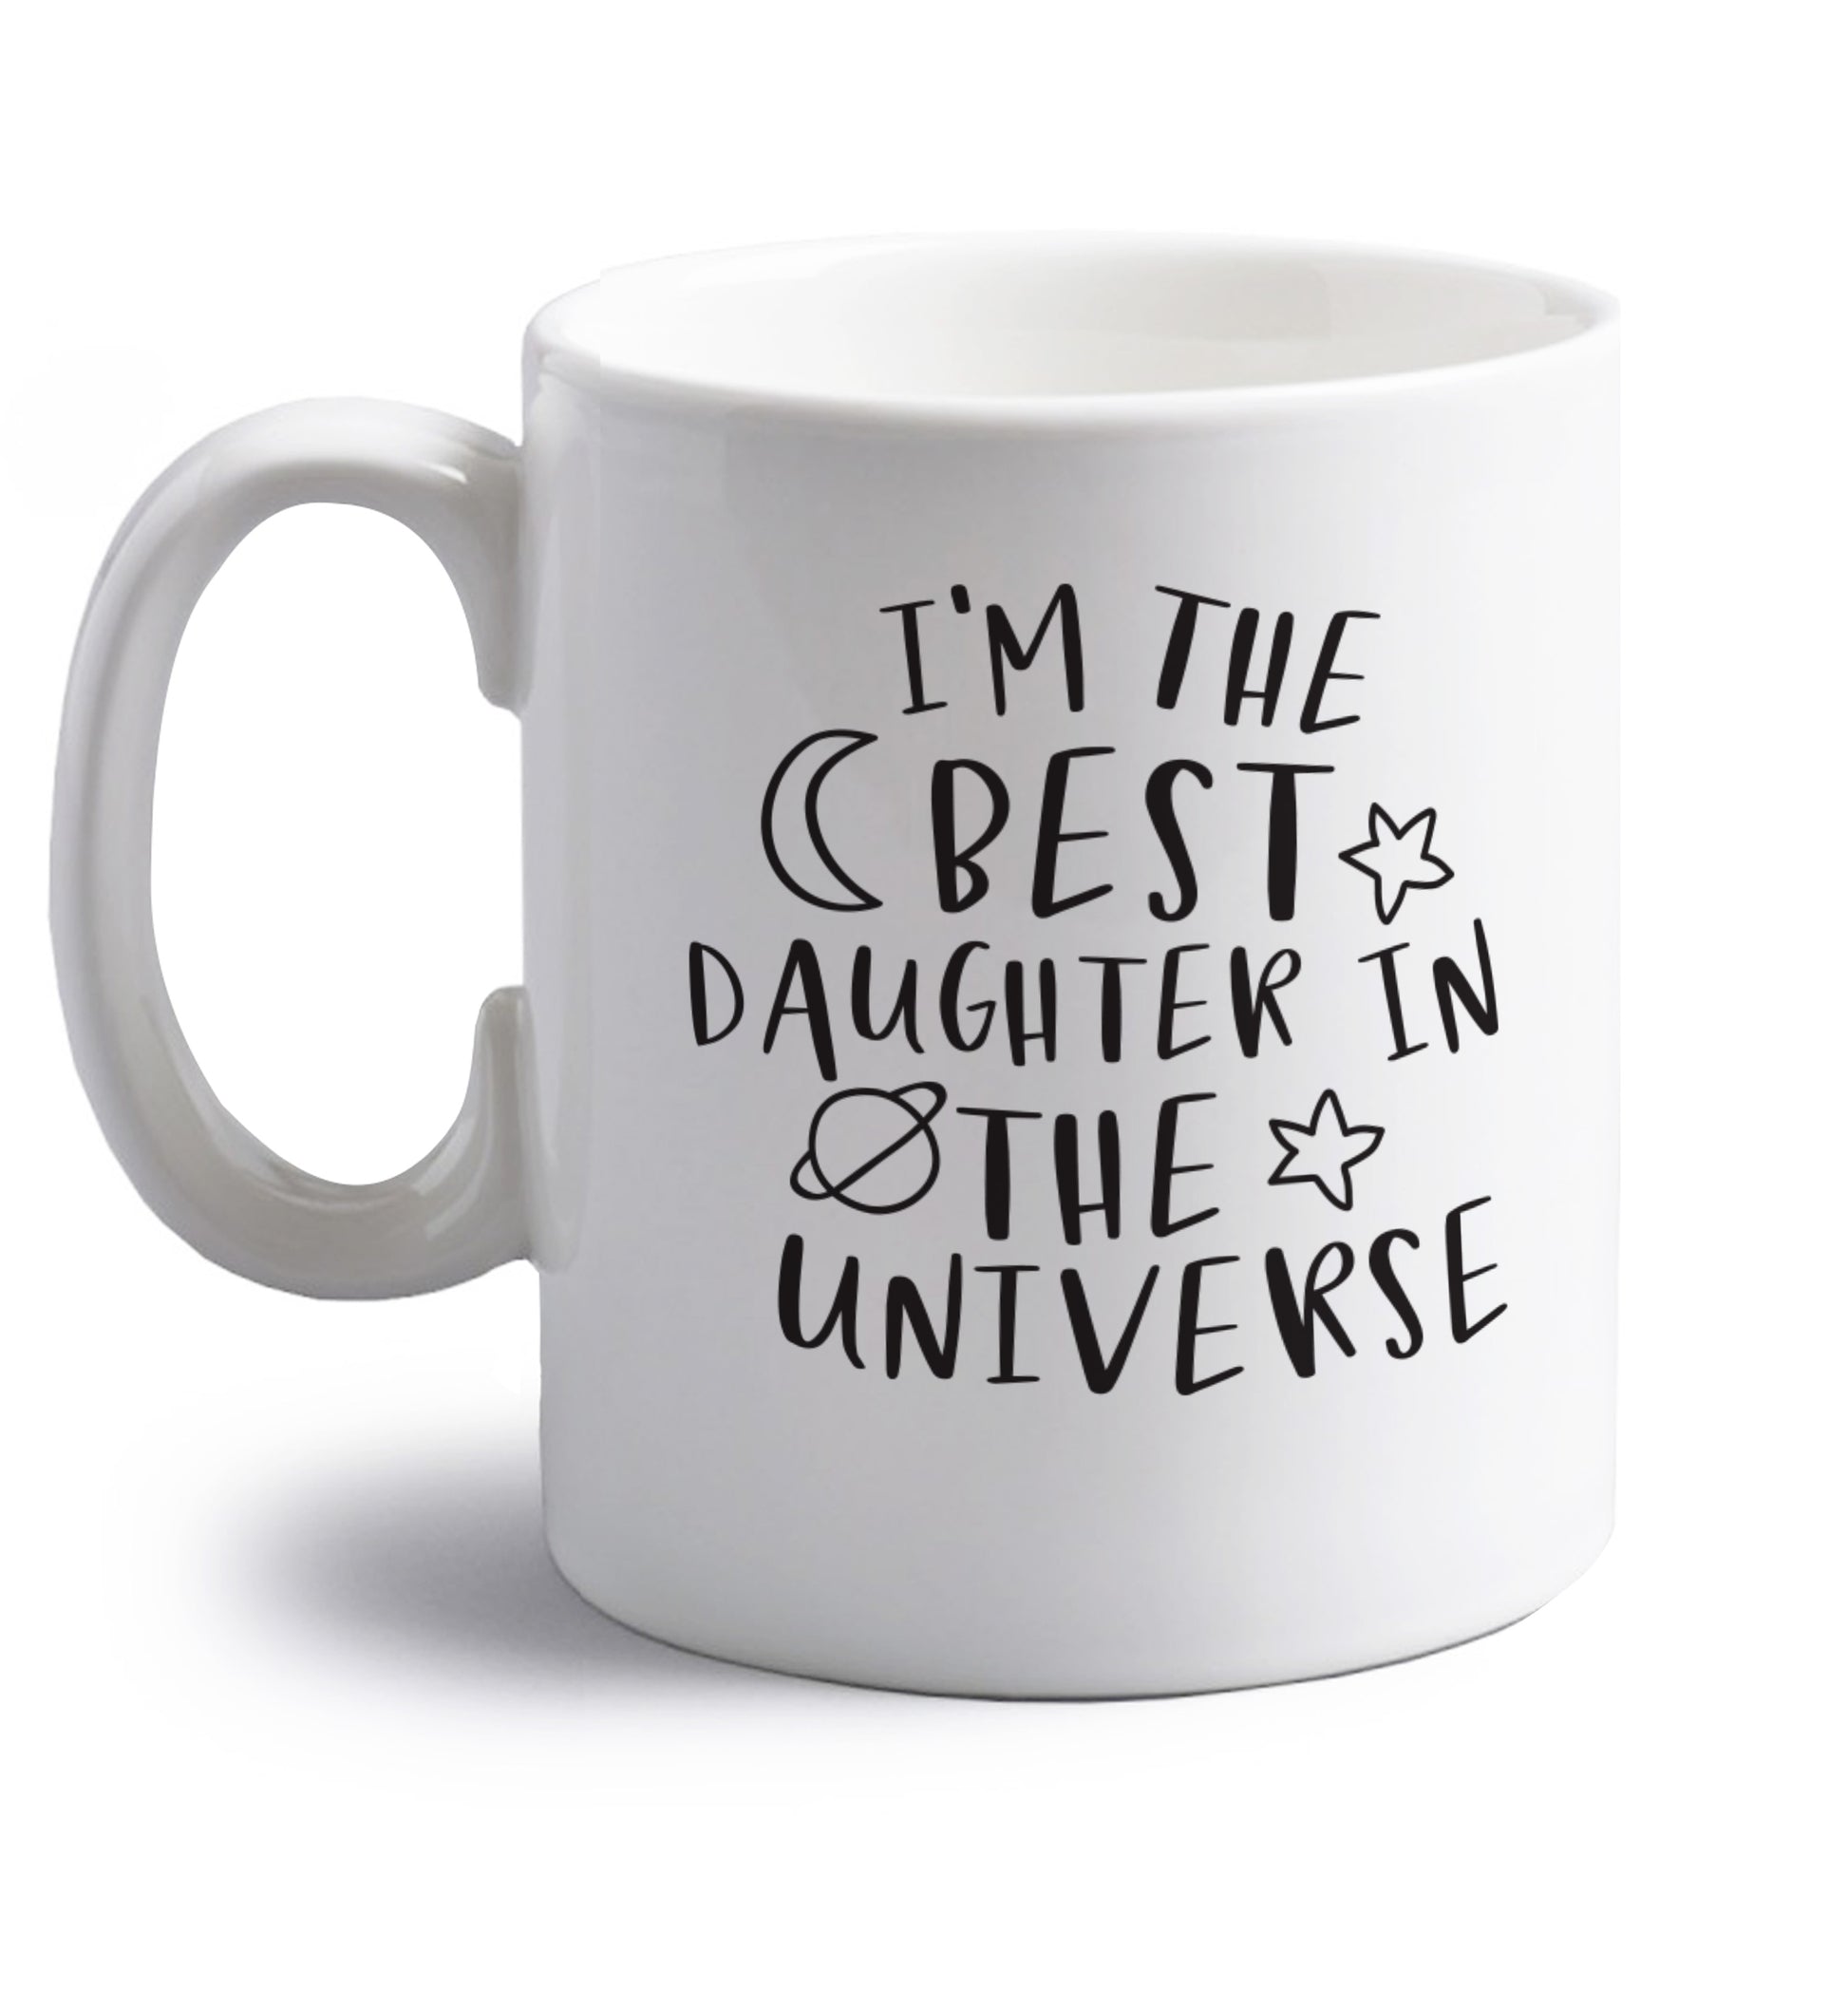 I'm the best daughter in the universe right handed white ceramic mug 